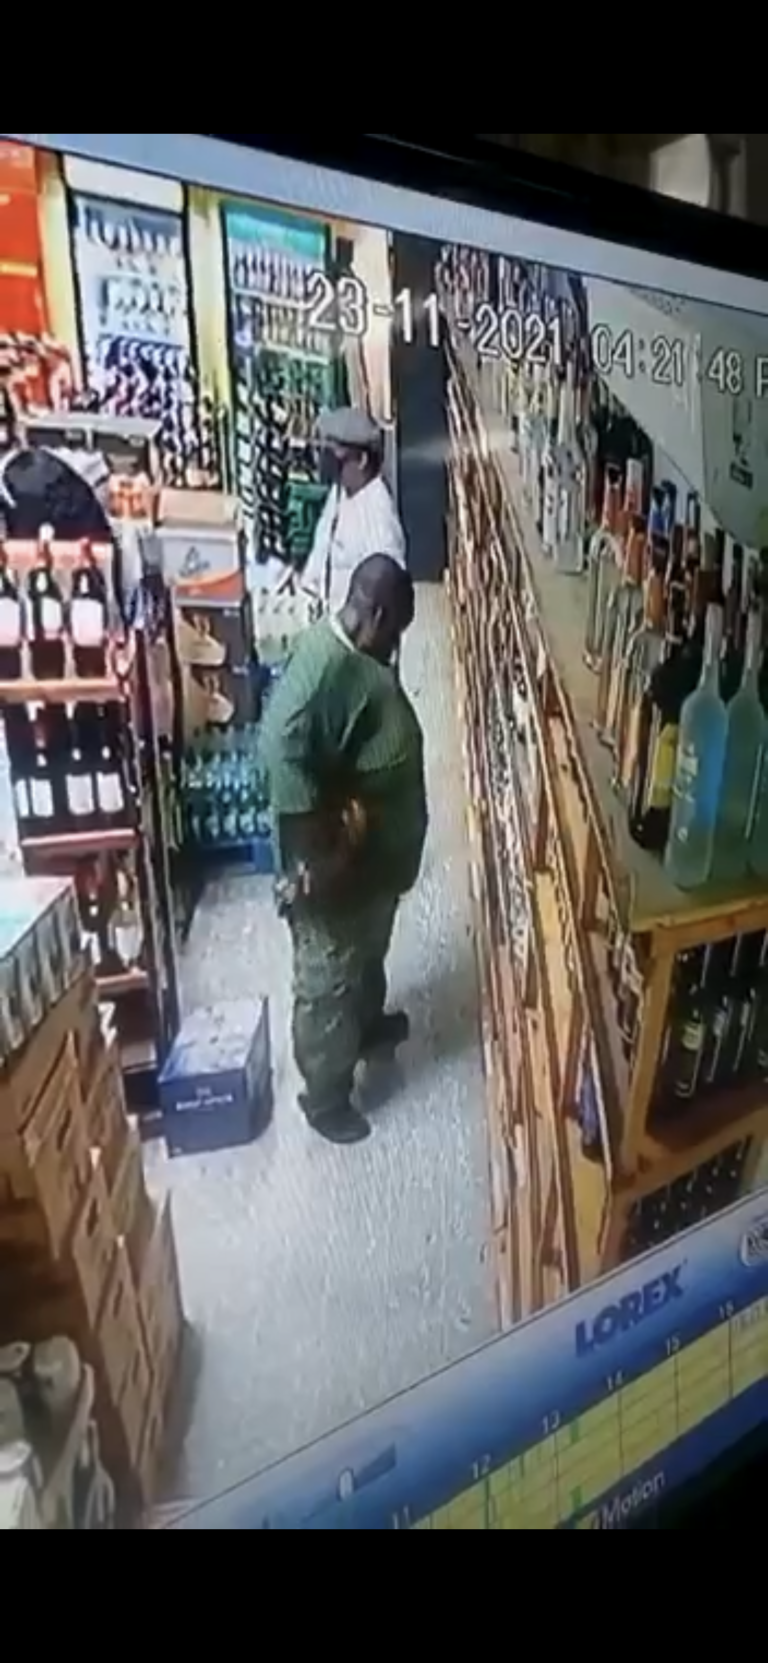 Thief pleads guilty after being caught on camera